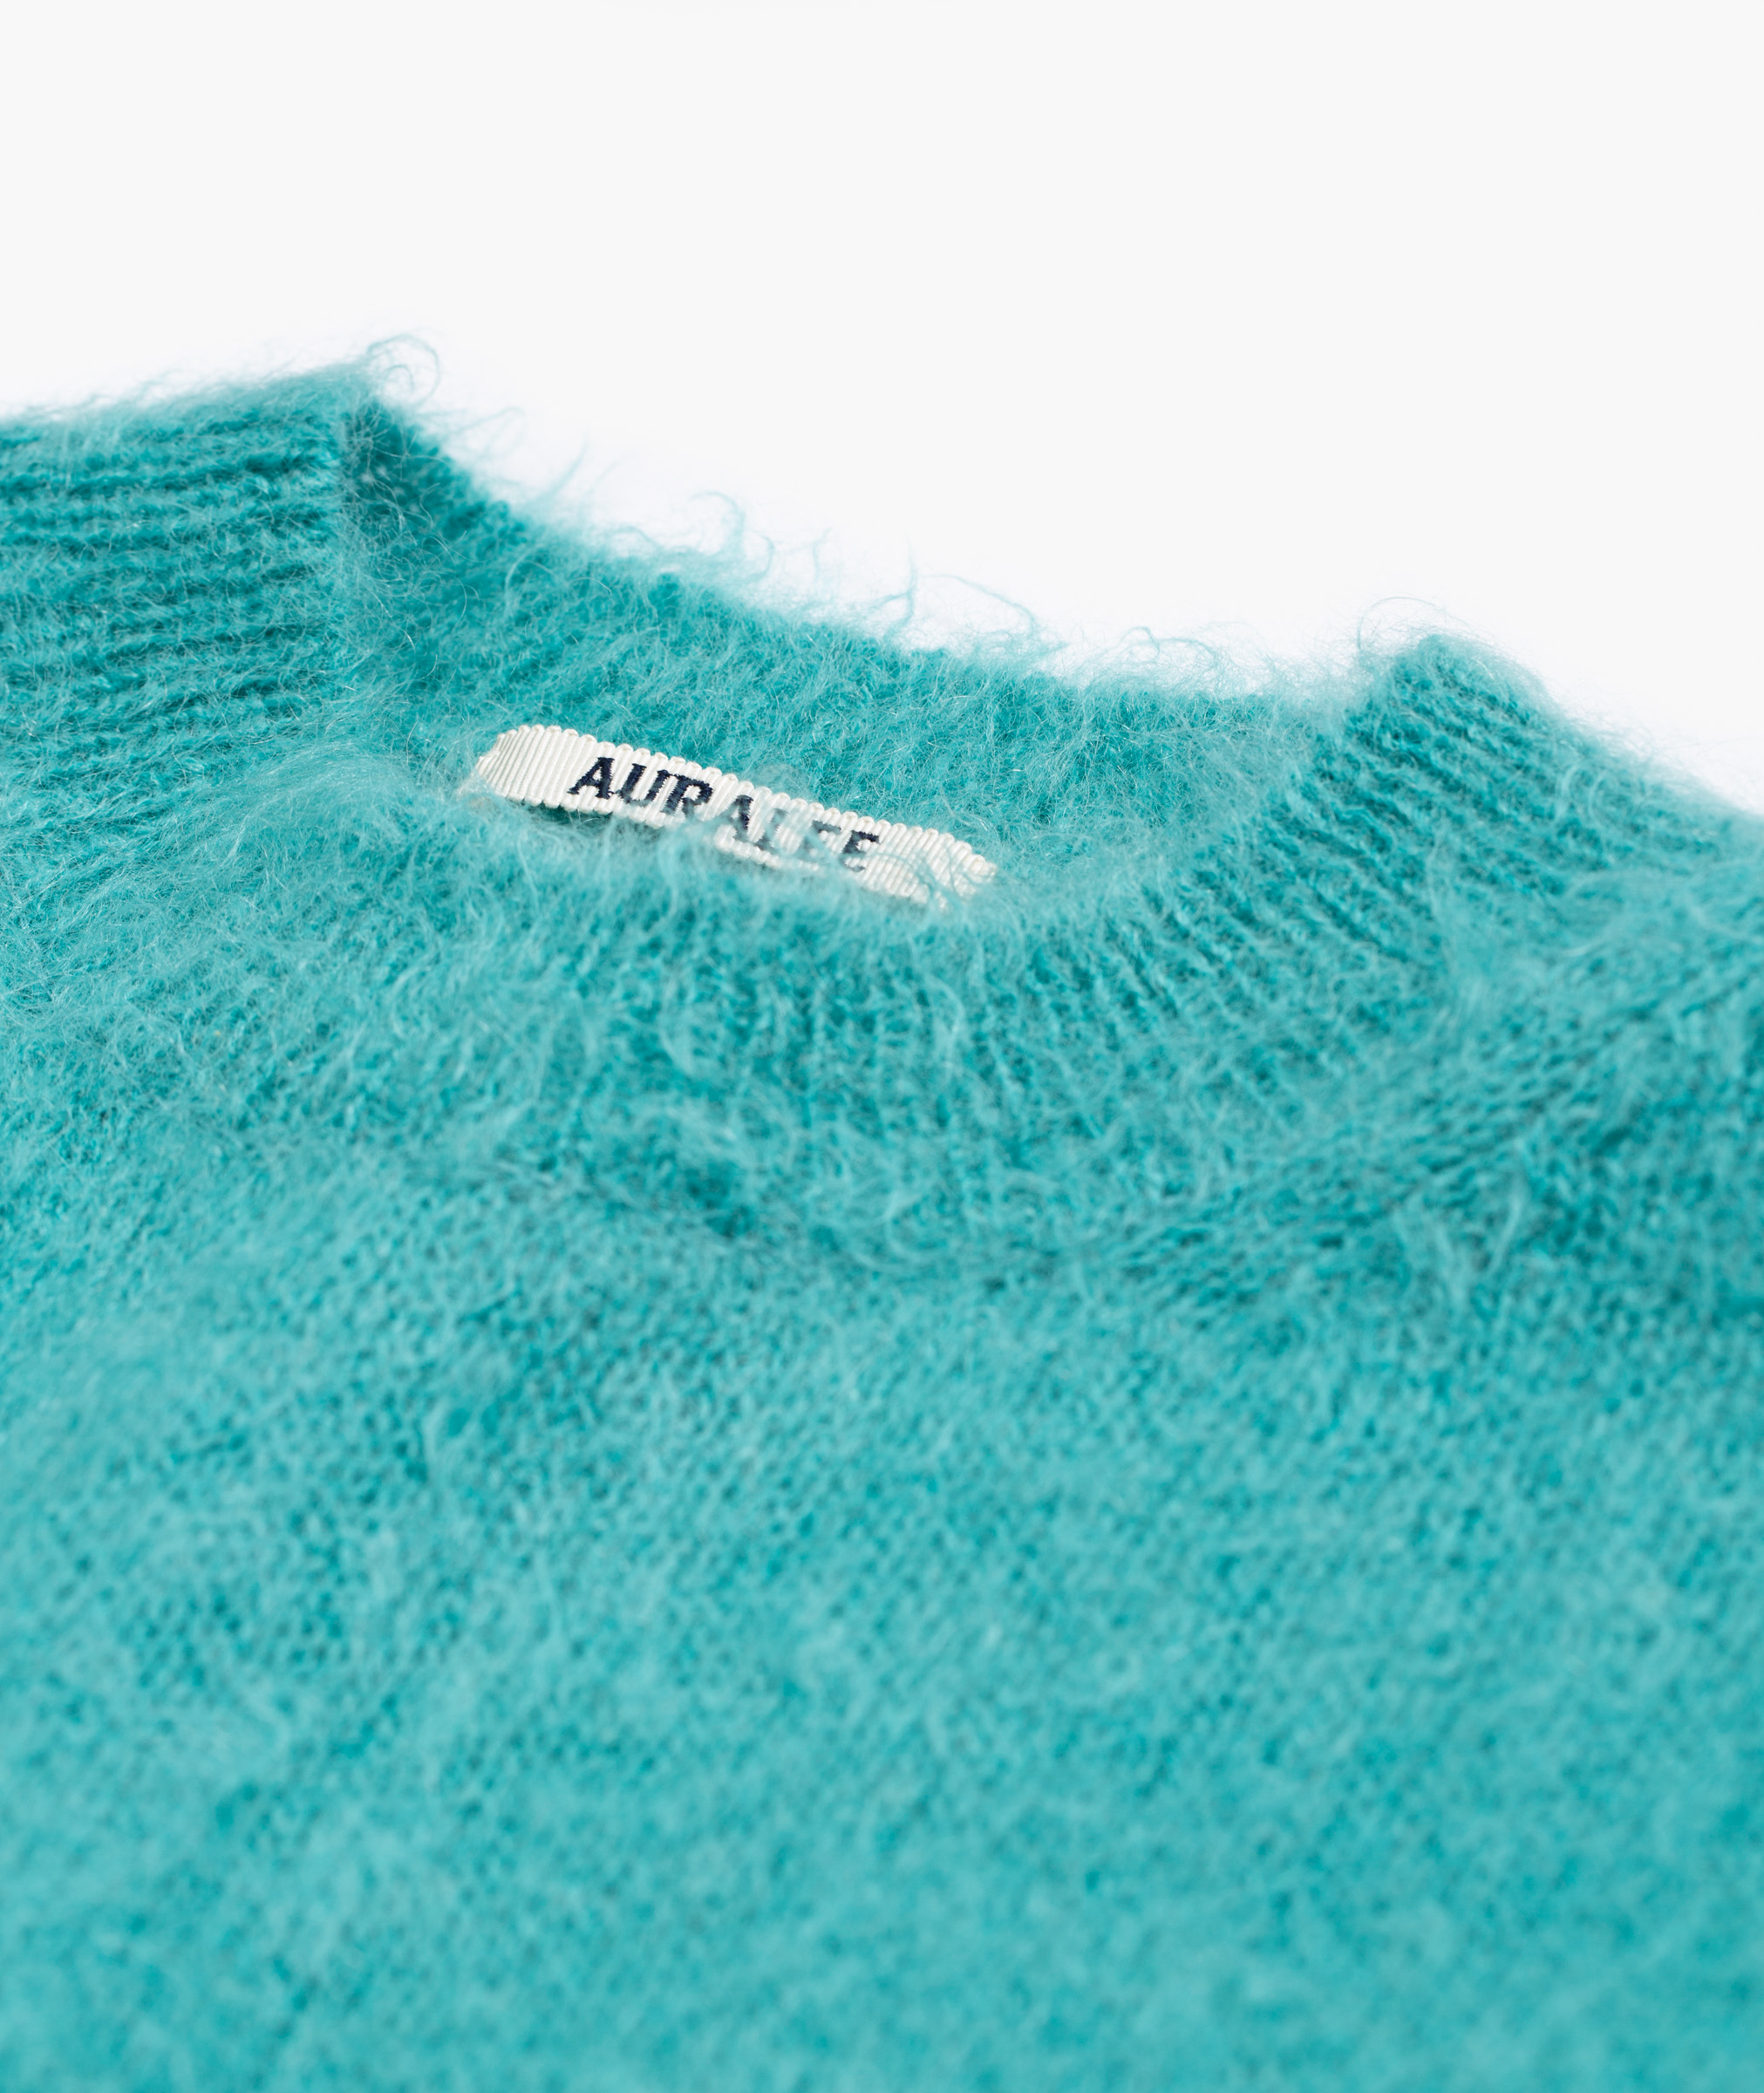 Norse Store | Shipping Worldwide - Auralee BRUSHED SUPER KID 